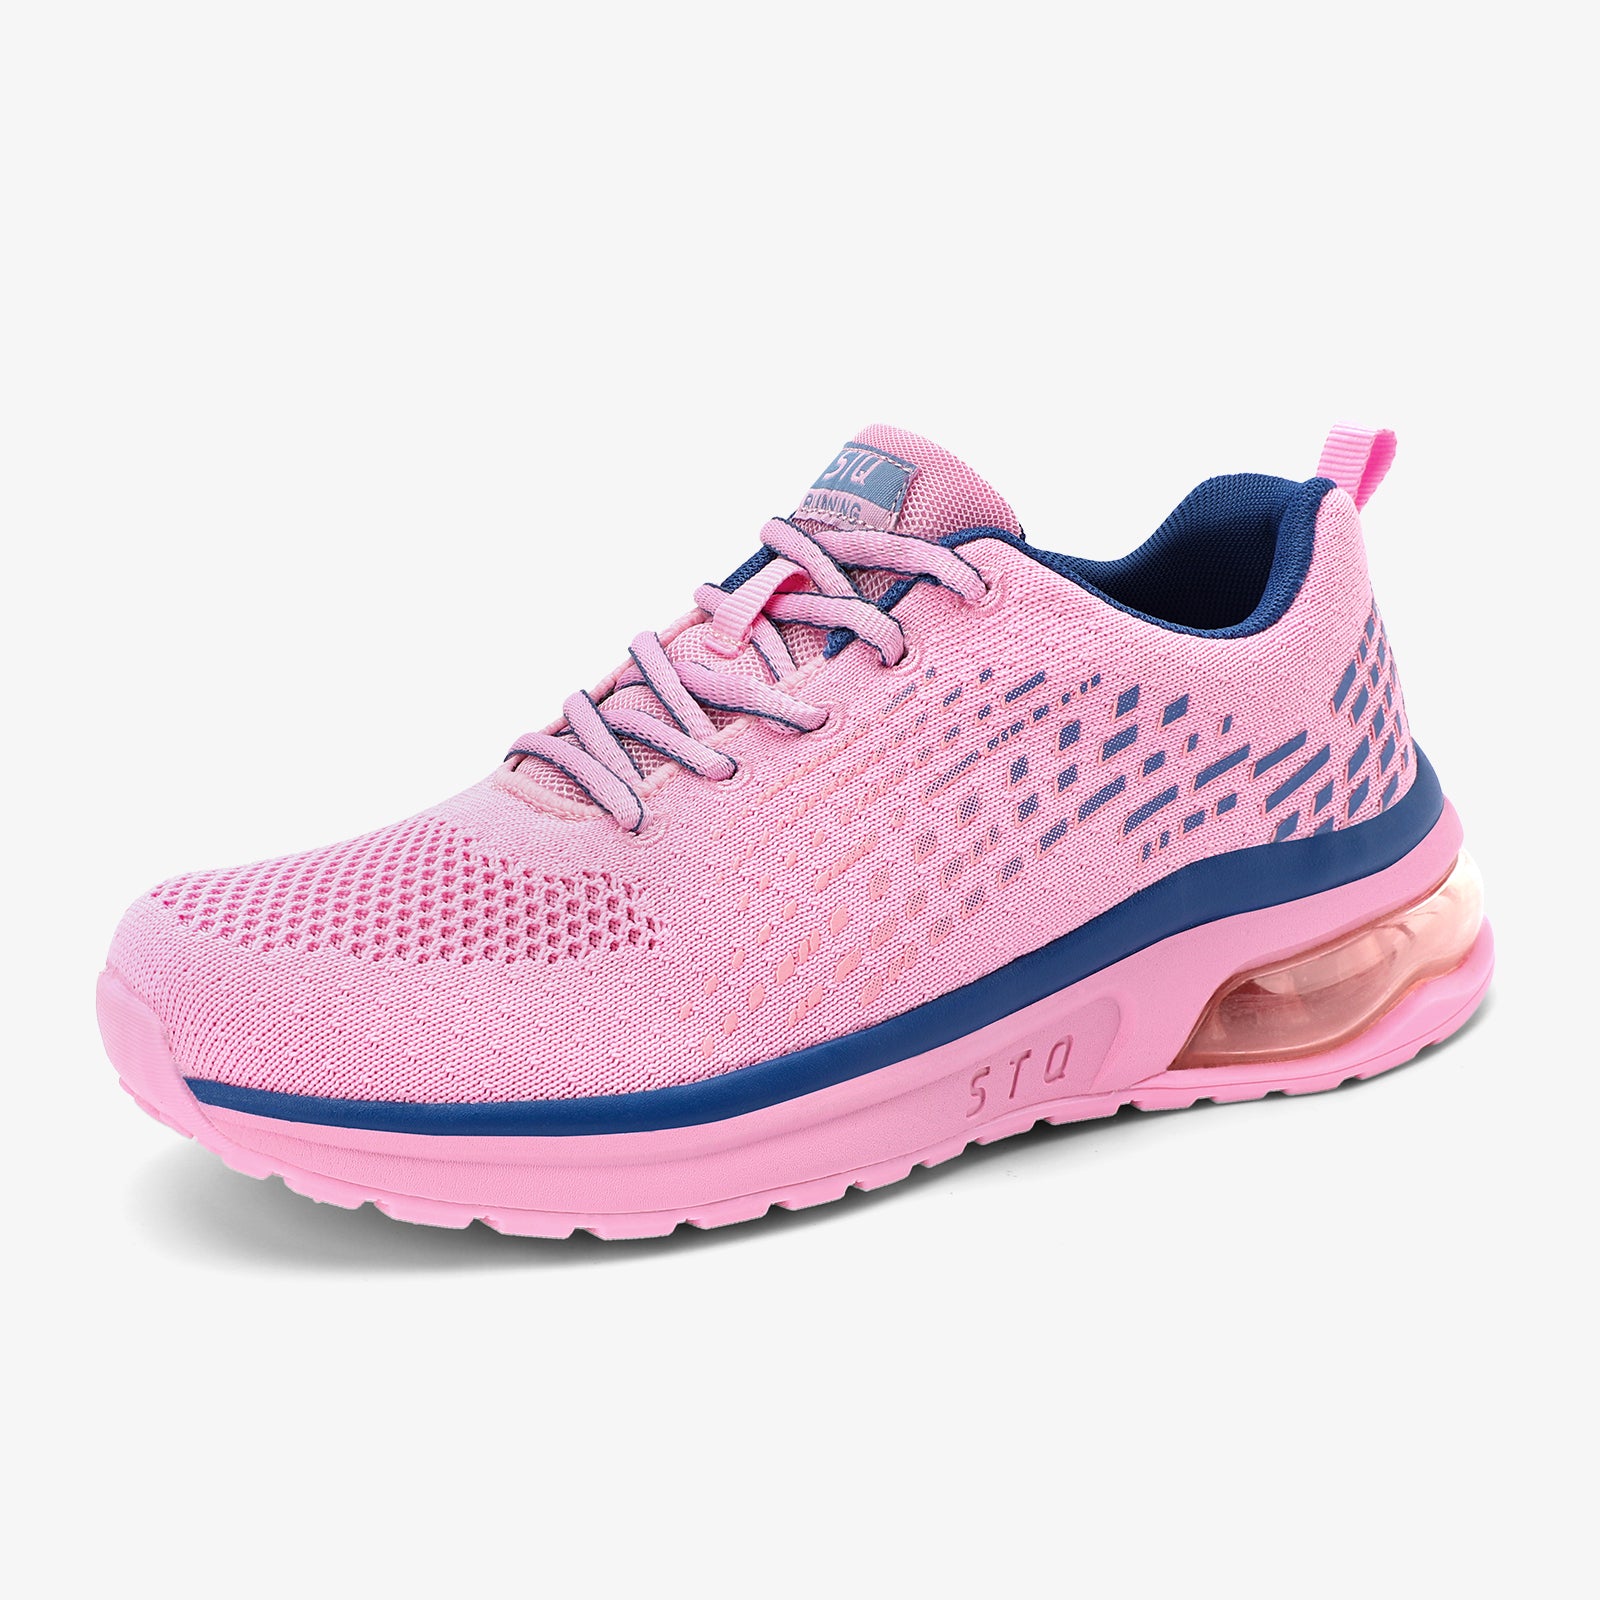 stq-air-cushion-running-shoes-sneakers-arch-support